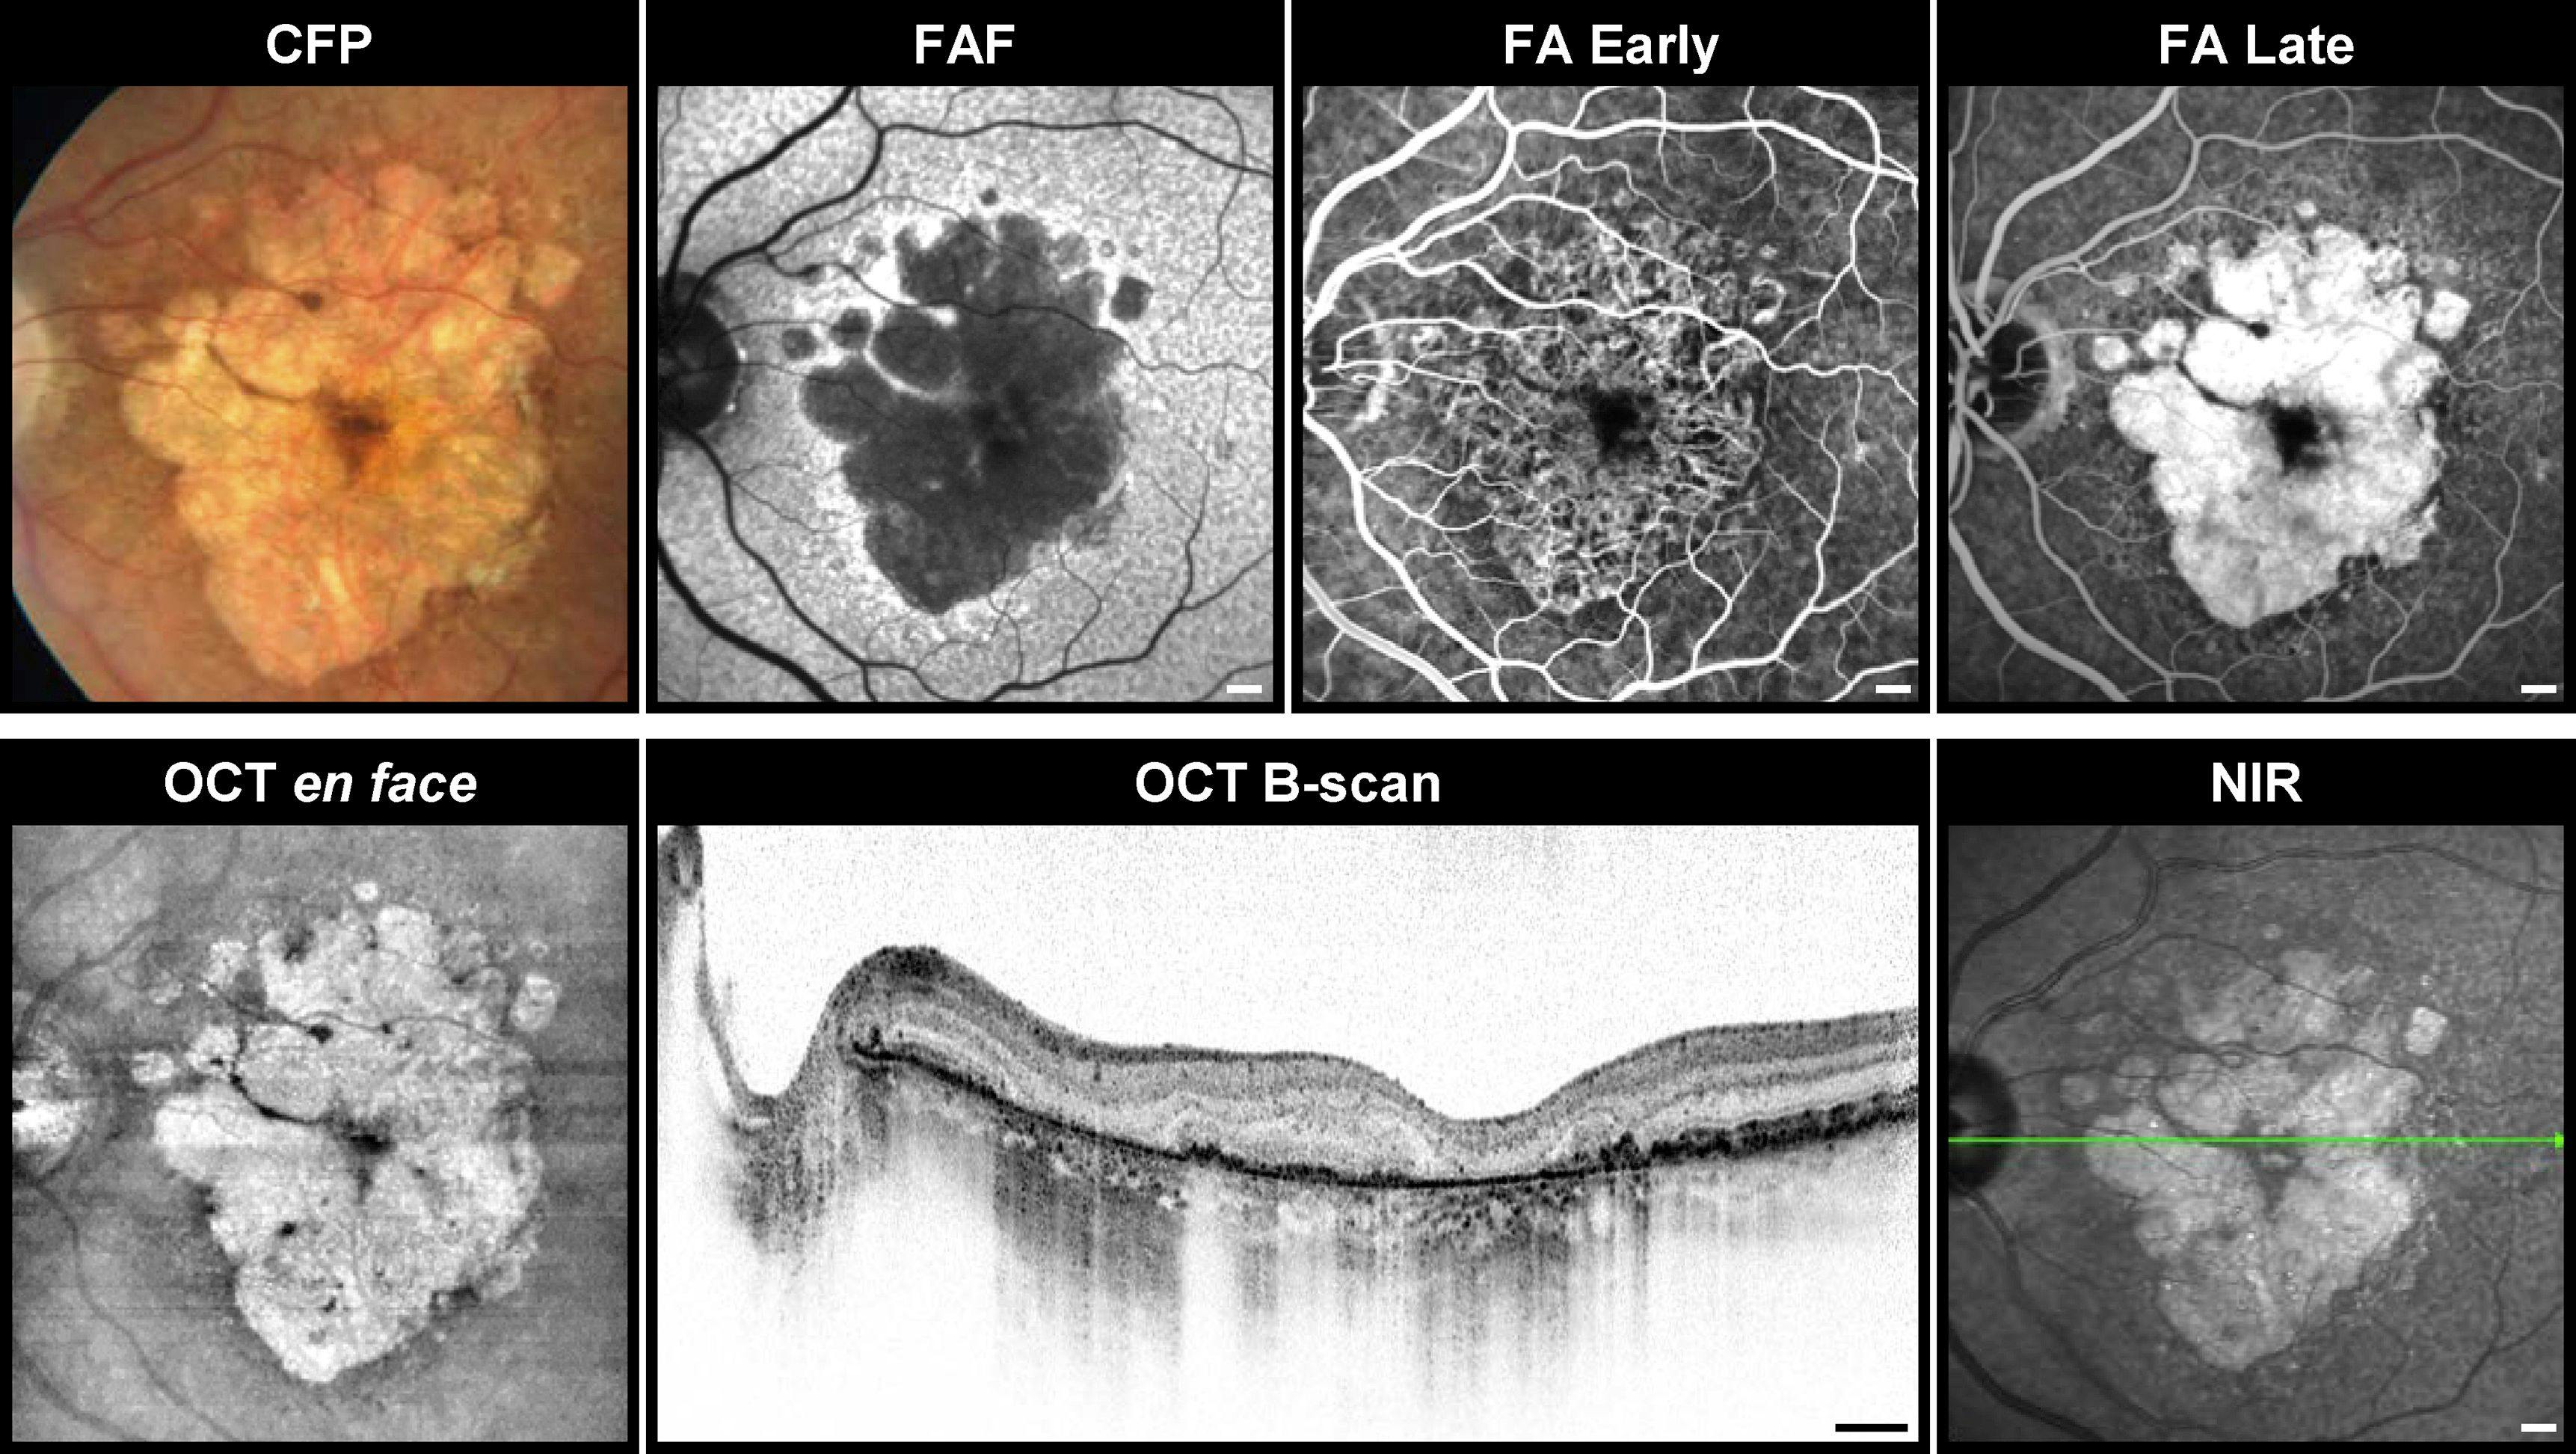 Geographic Atrophy OCT and FA Imaging